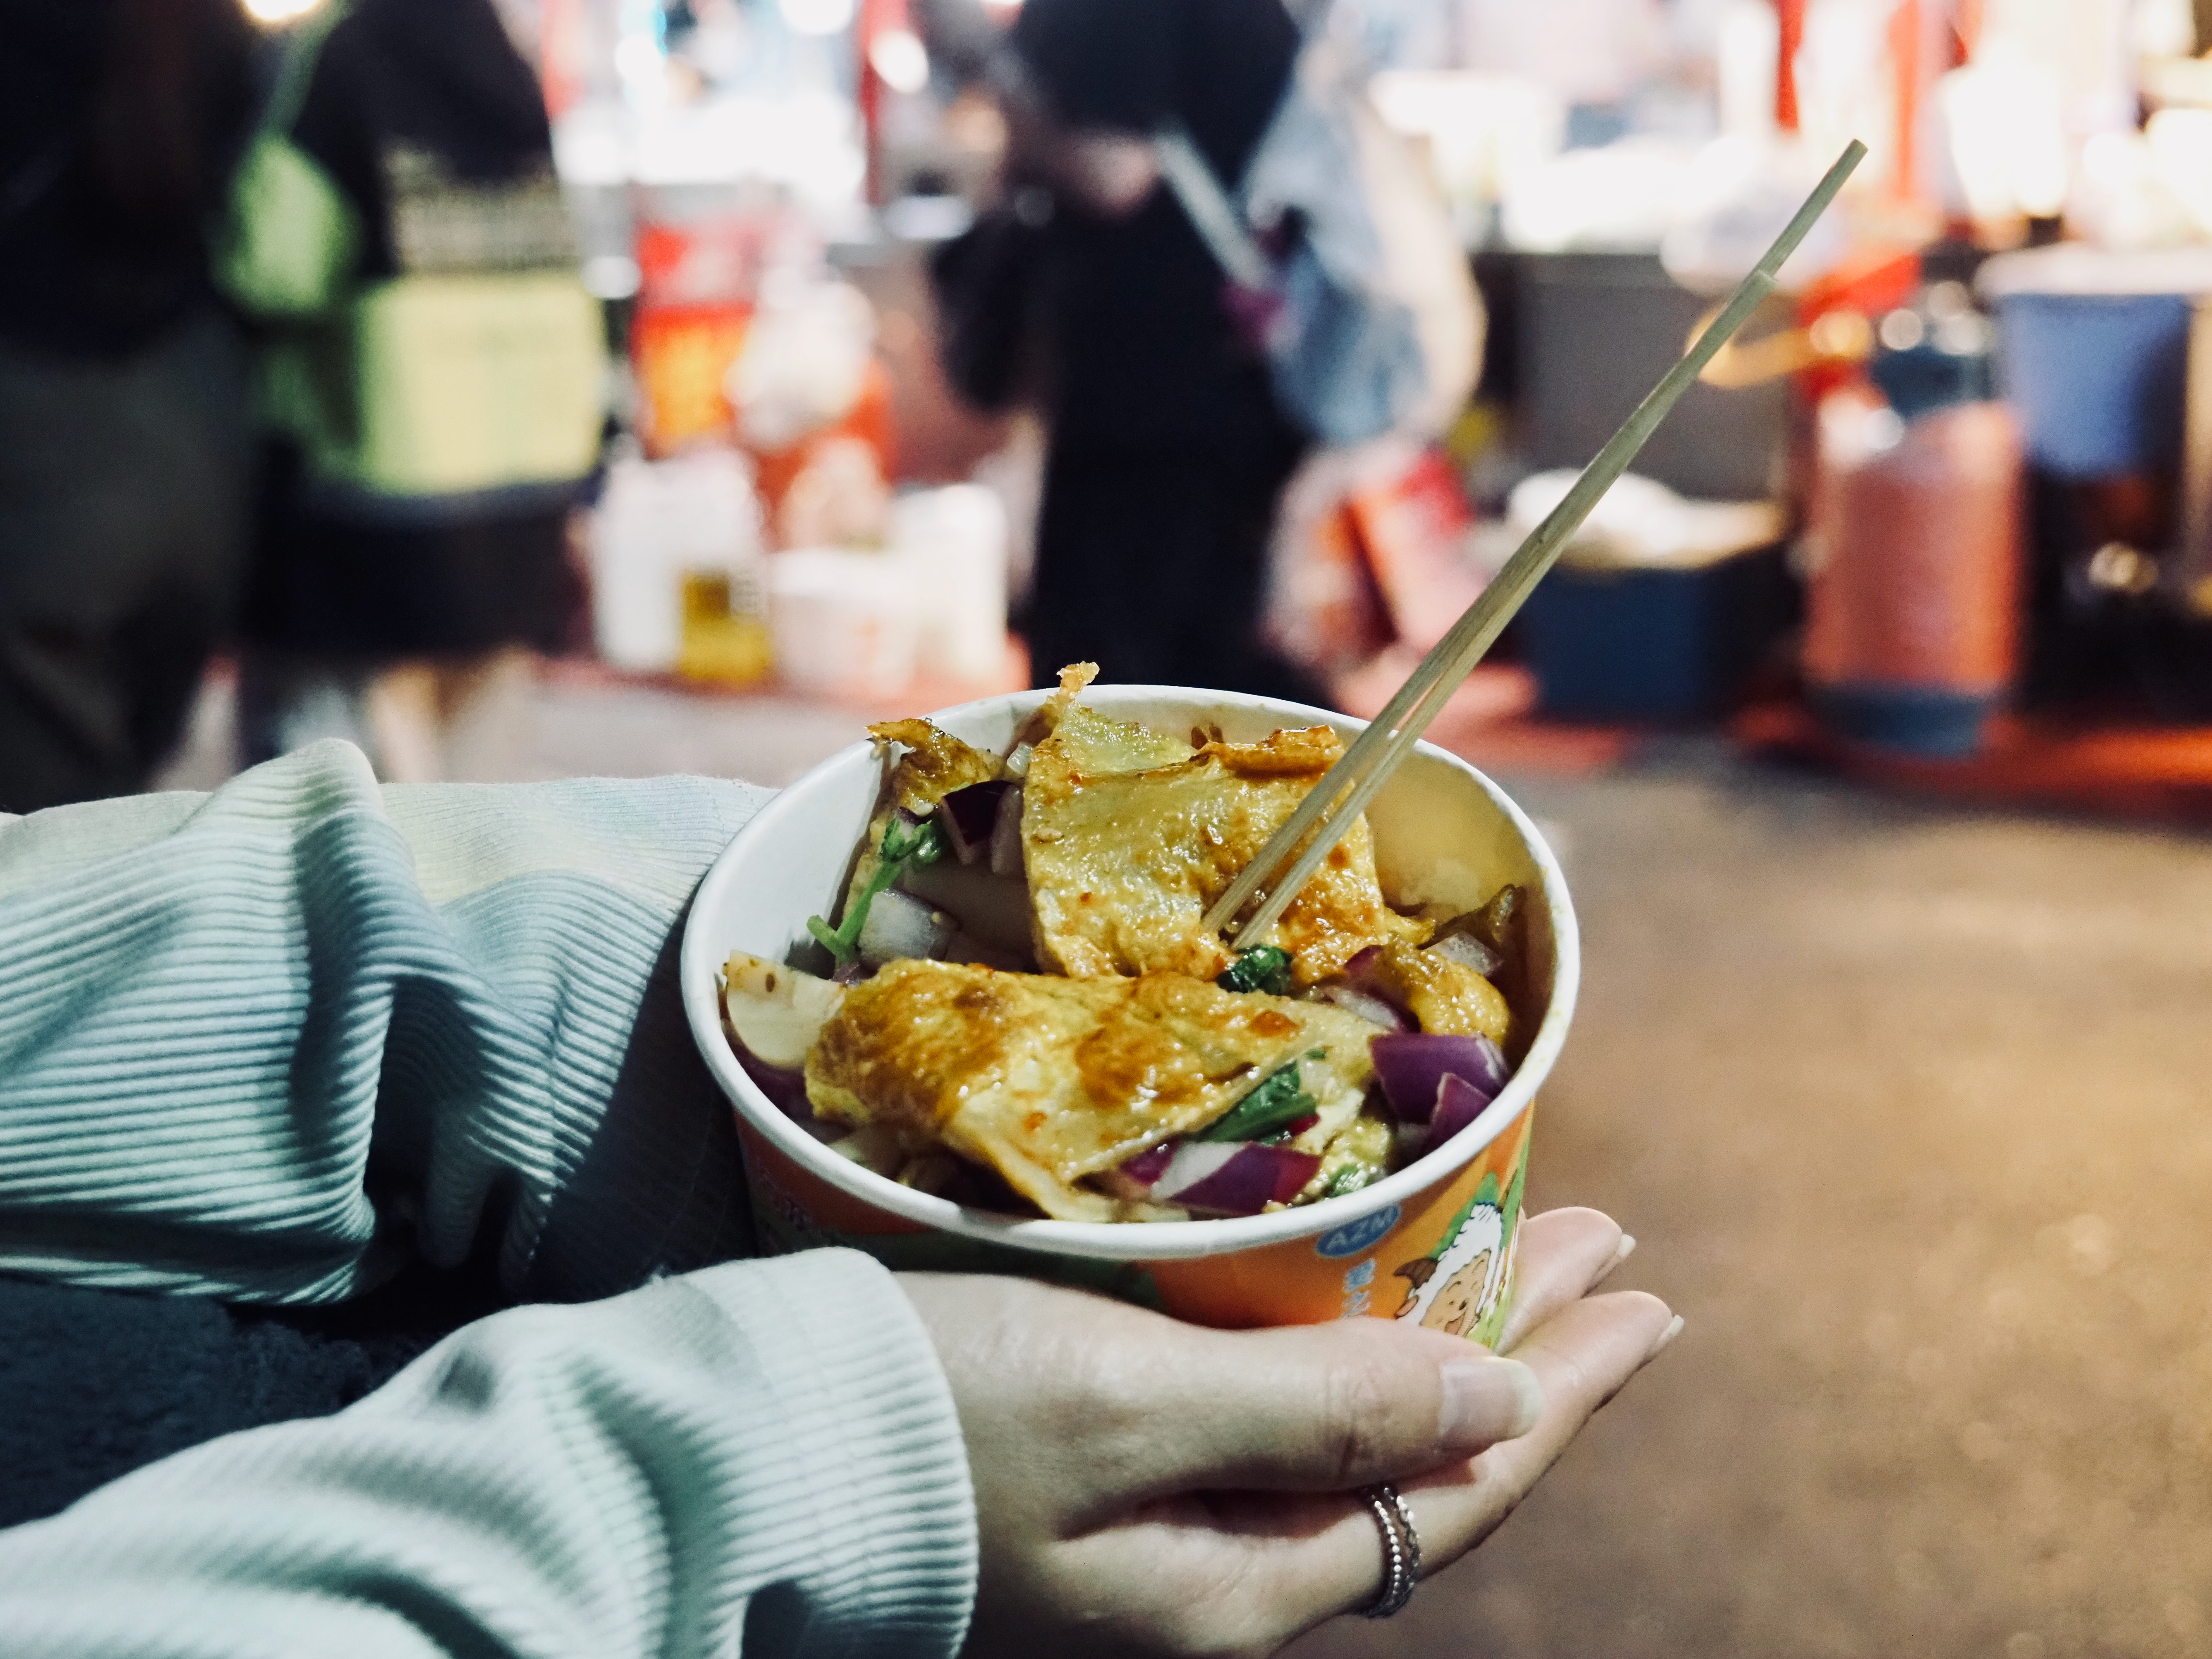 A photo of a small disposable bowl of wide noodles with veggies mixed in. In the background is a night market.